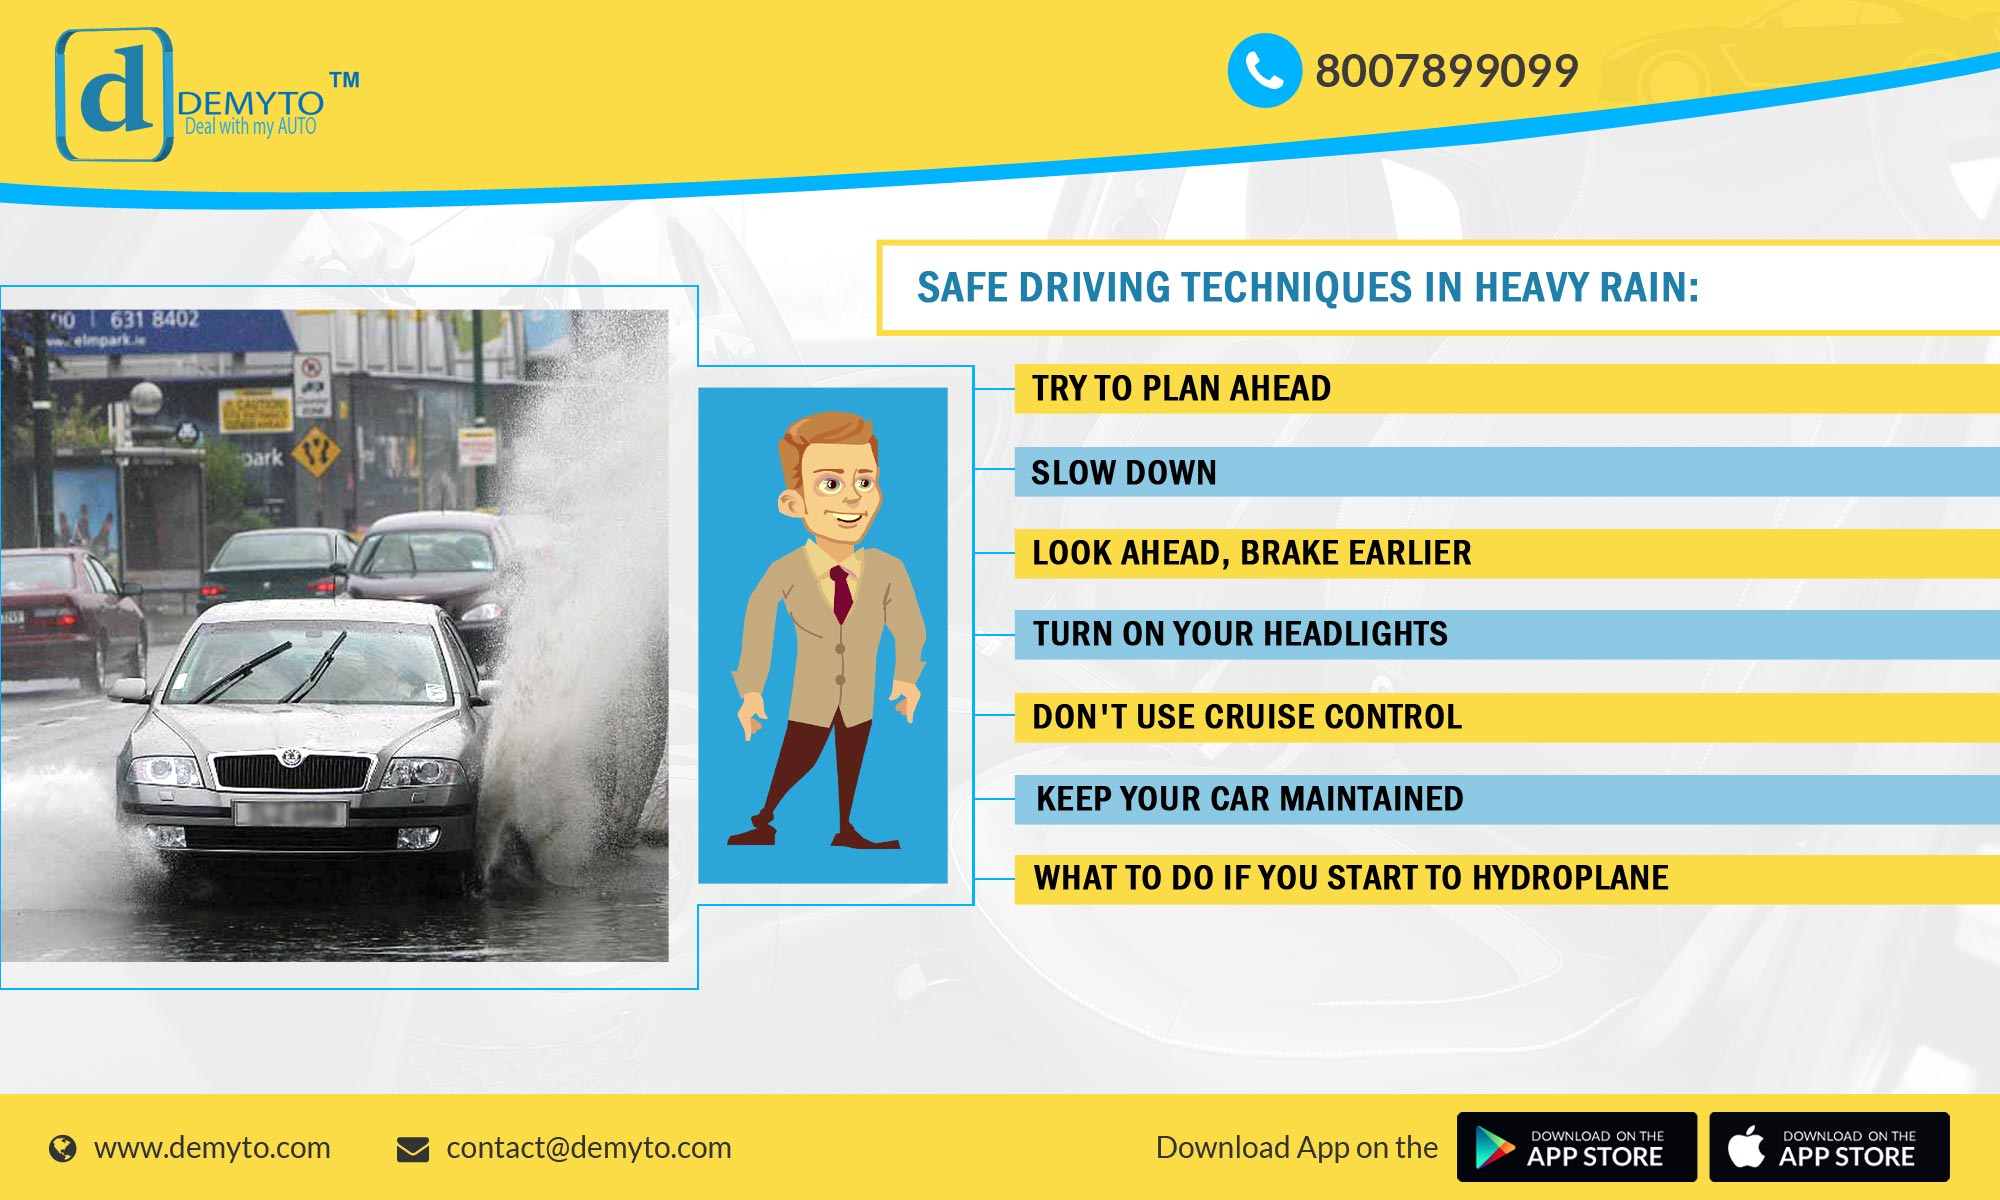 Avoid jeopardy while DRIVING in heavy rain